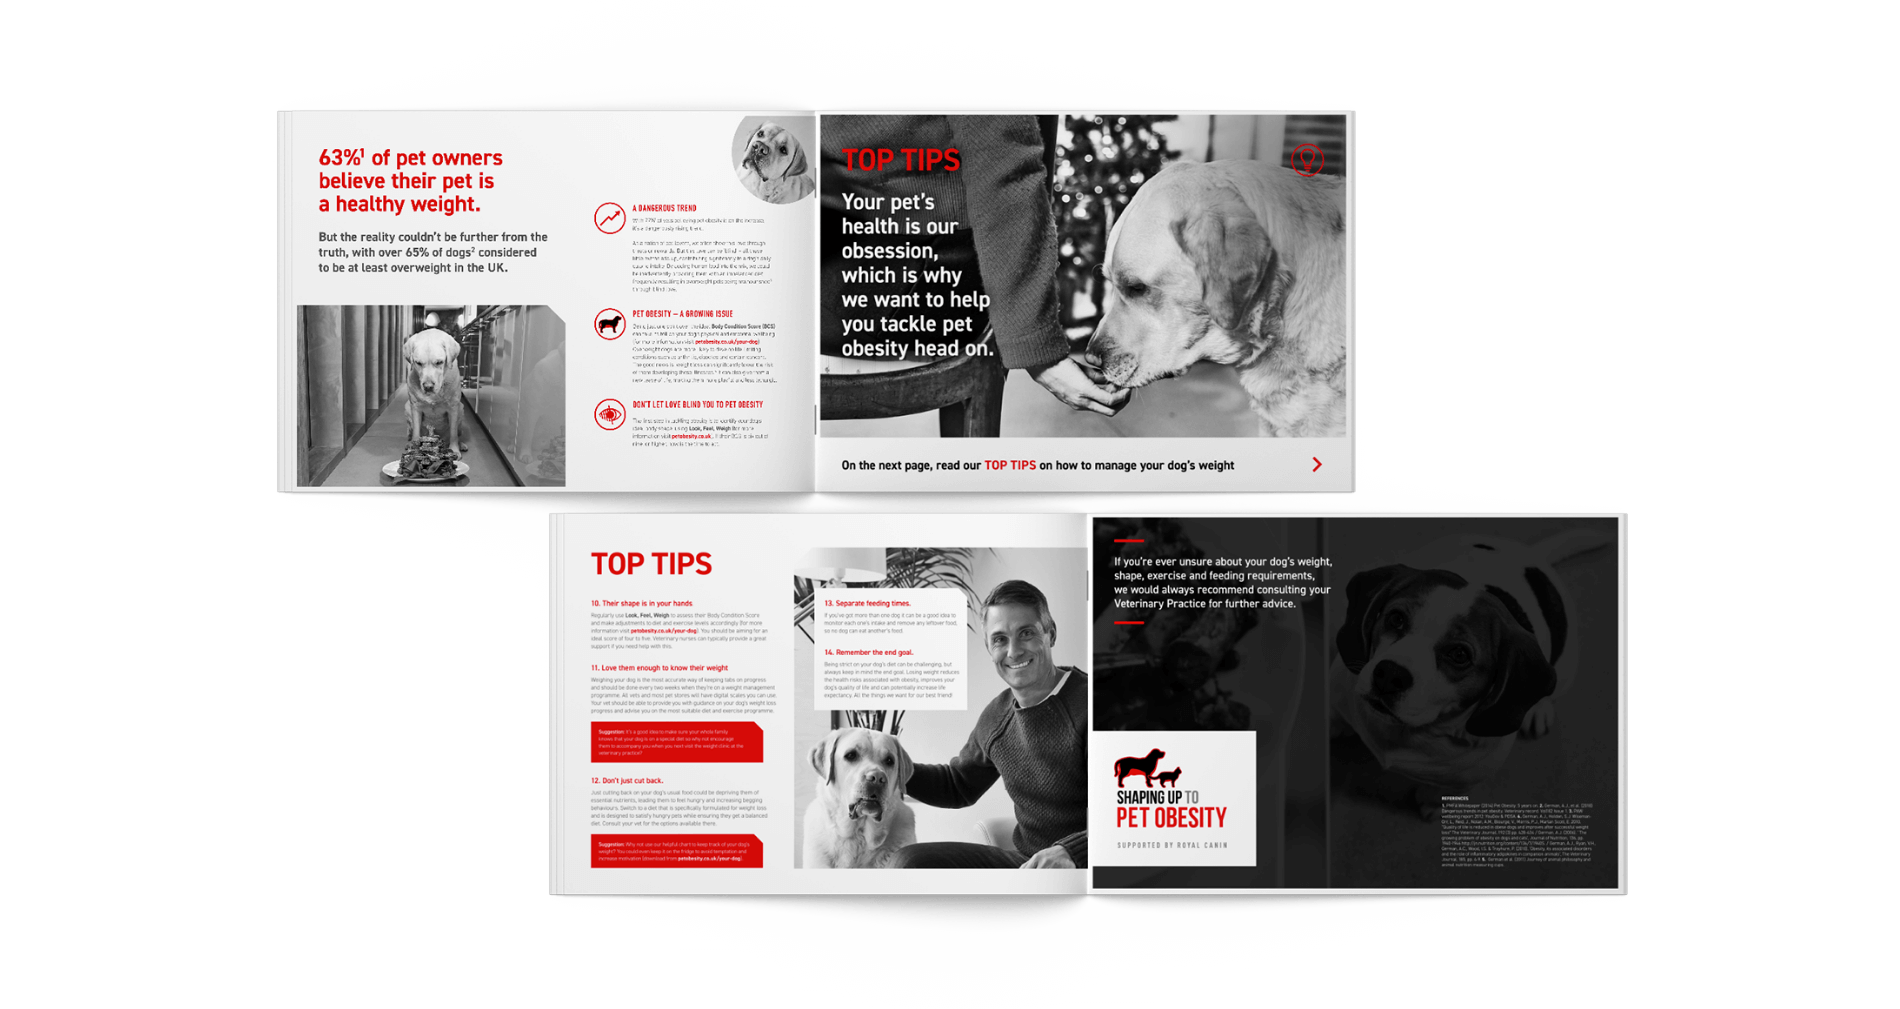 oyal Canin Shaping up to Pet Obesity booklet inside